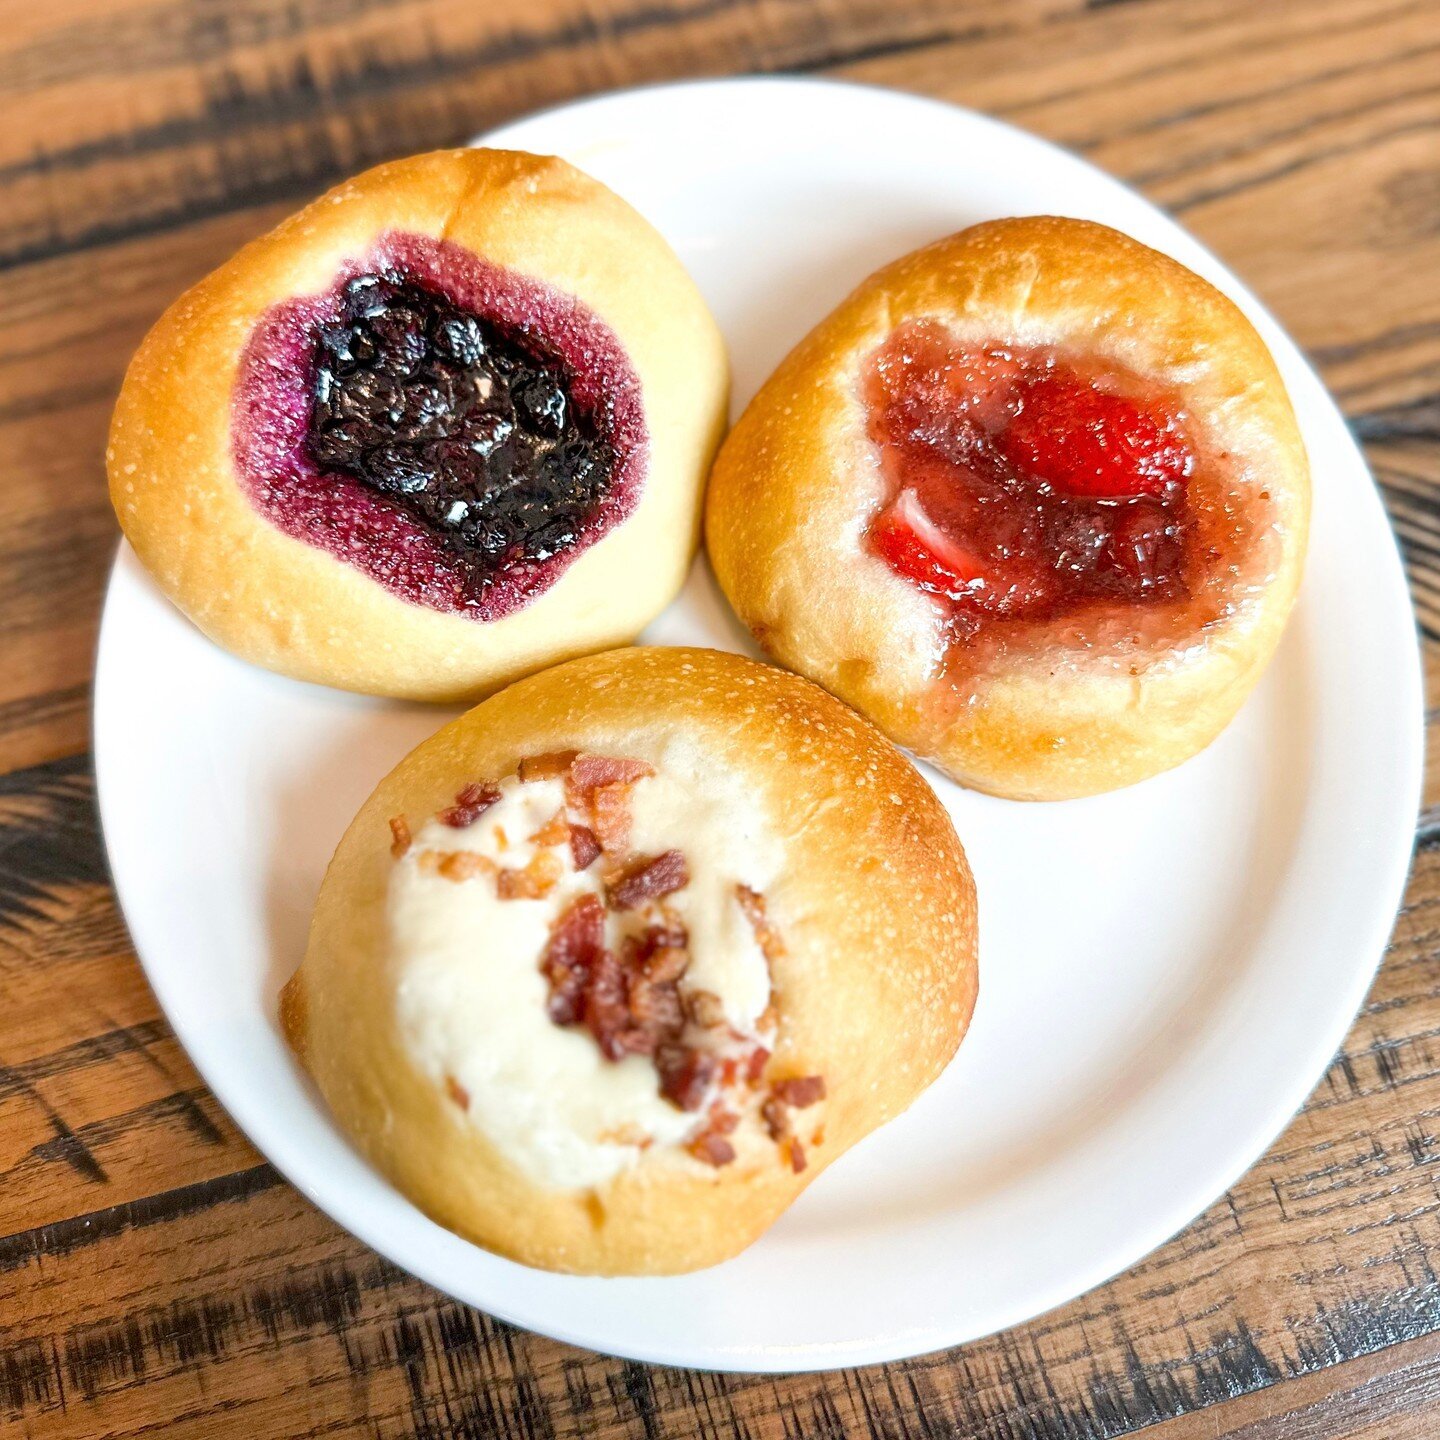 Discover the perfect breakfast with Marty B's Coffee&rsquo;s Kolaches! Order online and pickup or drop by and stay awhile. Either way, savor the flavors of strawberry, blueberry, and bacon cream cheese in our freshly baked Kolaches! 

#martybscoffee 